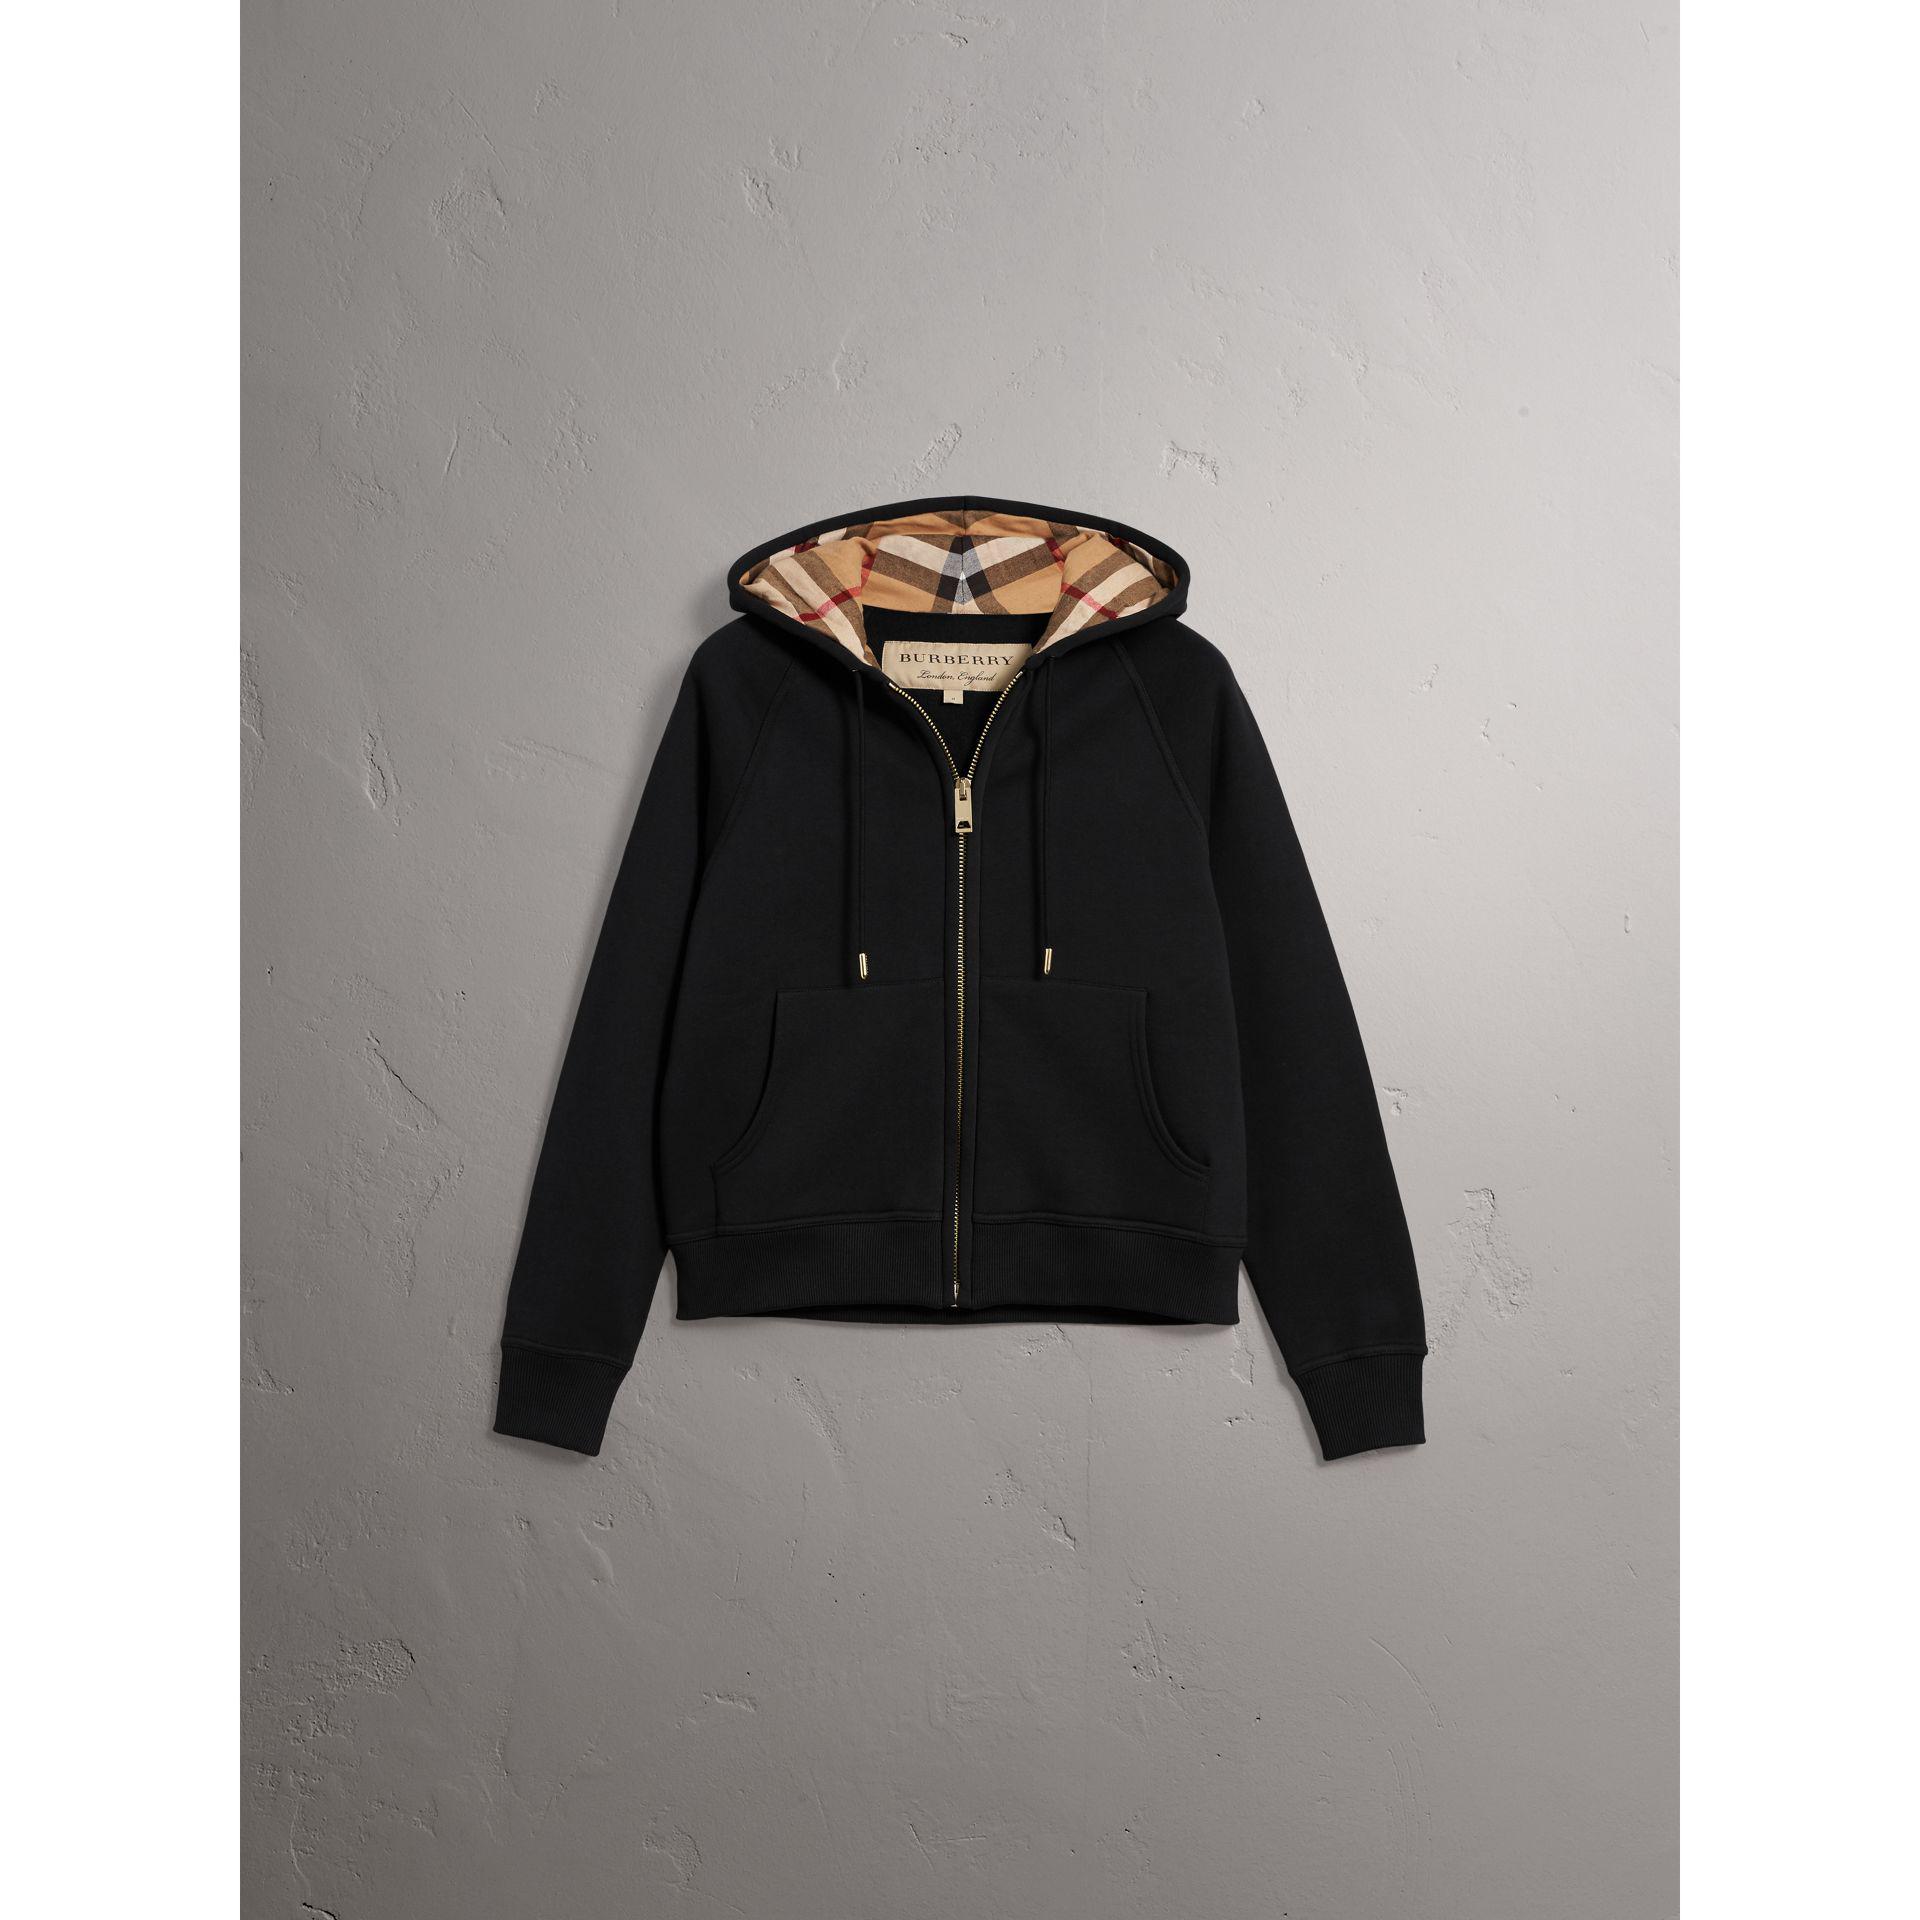 Burberry Hooded Zip-front Cotton Blend 